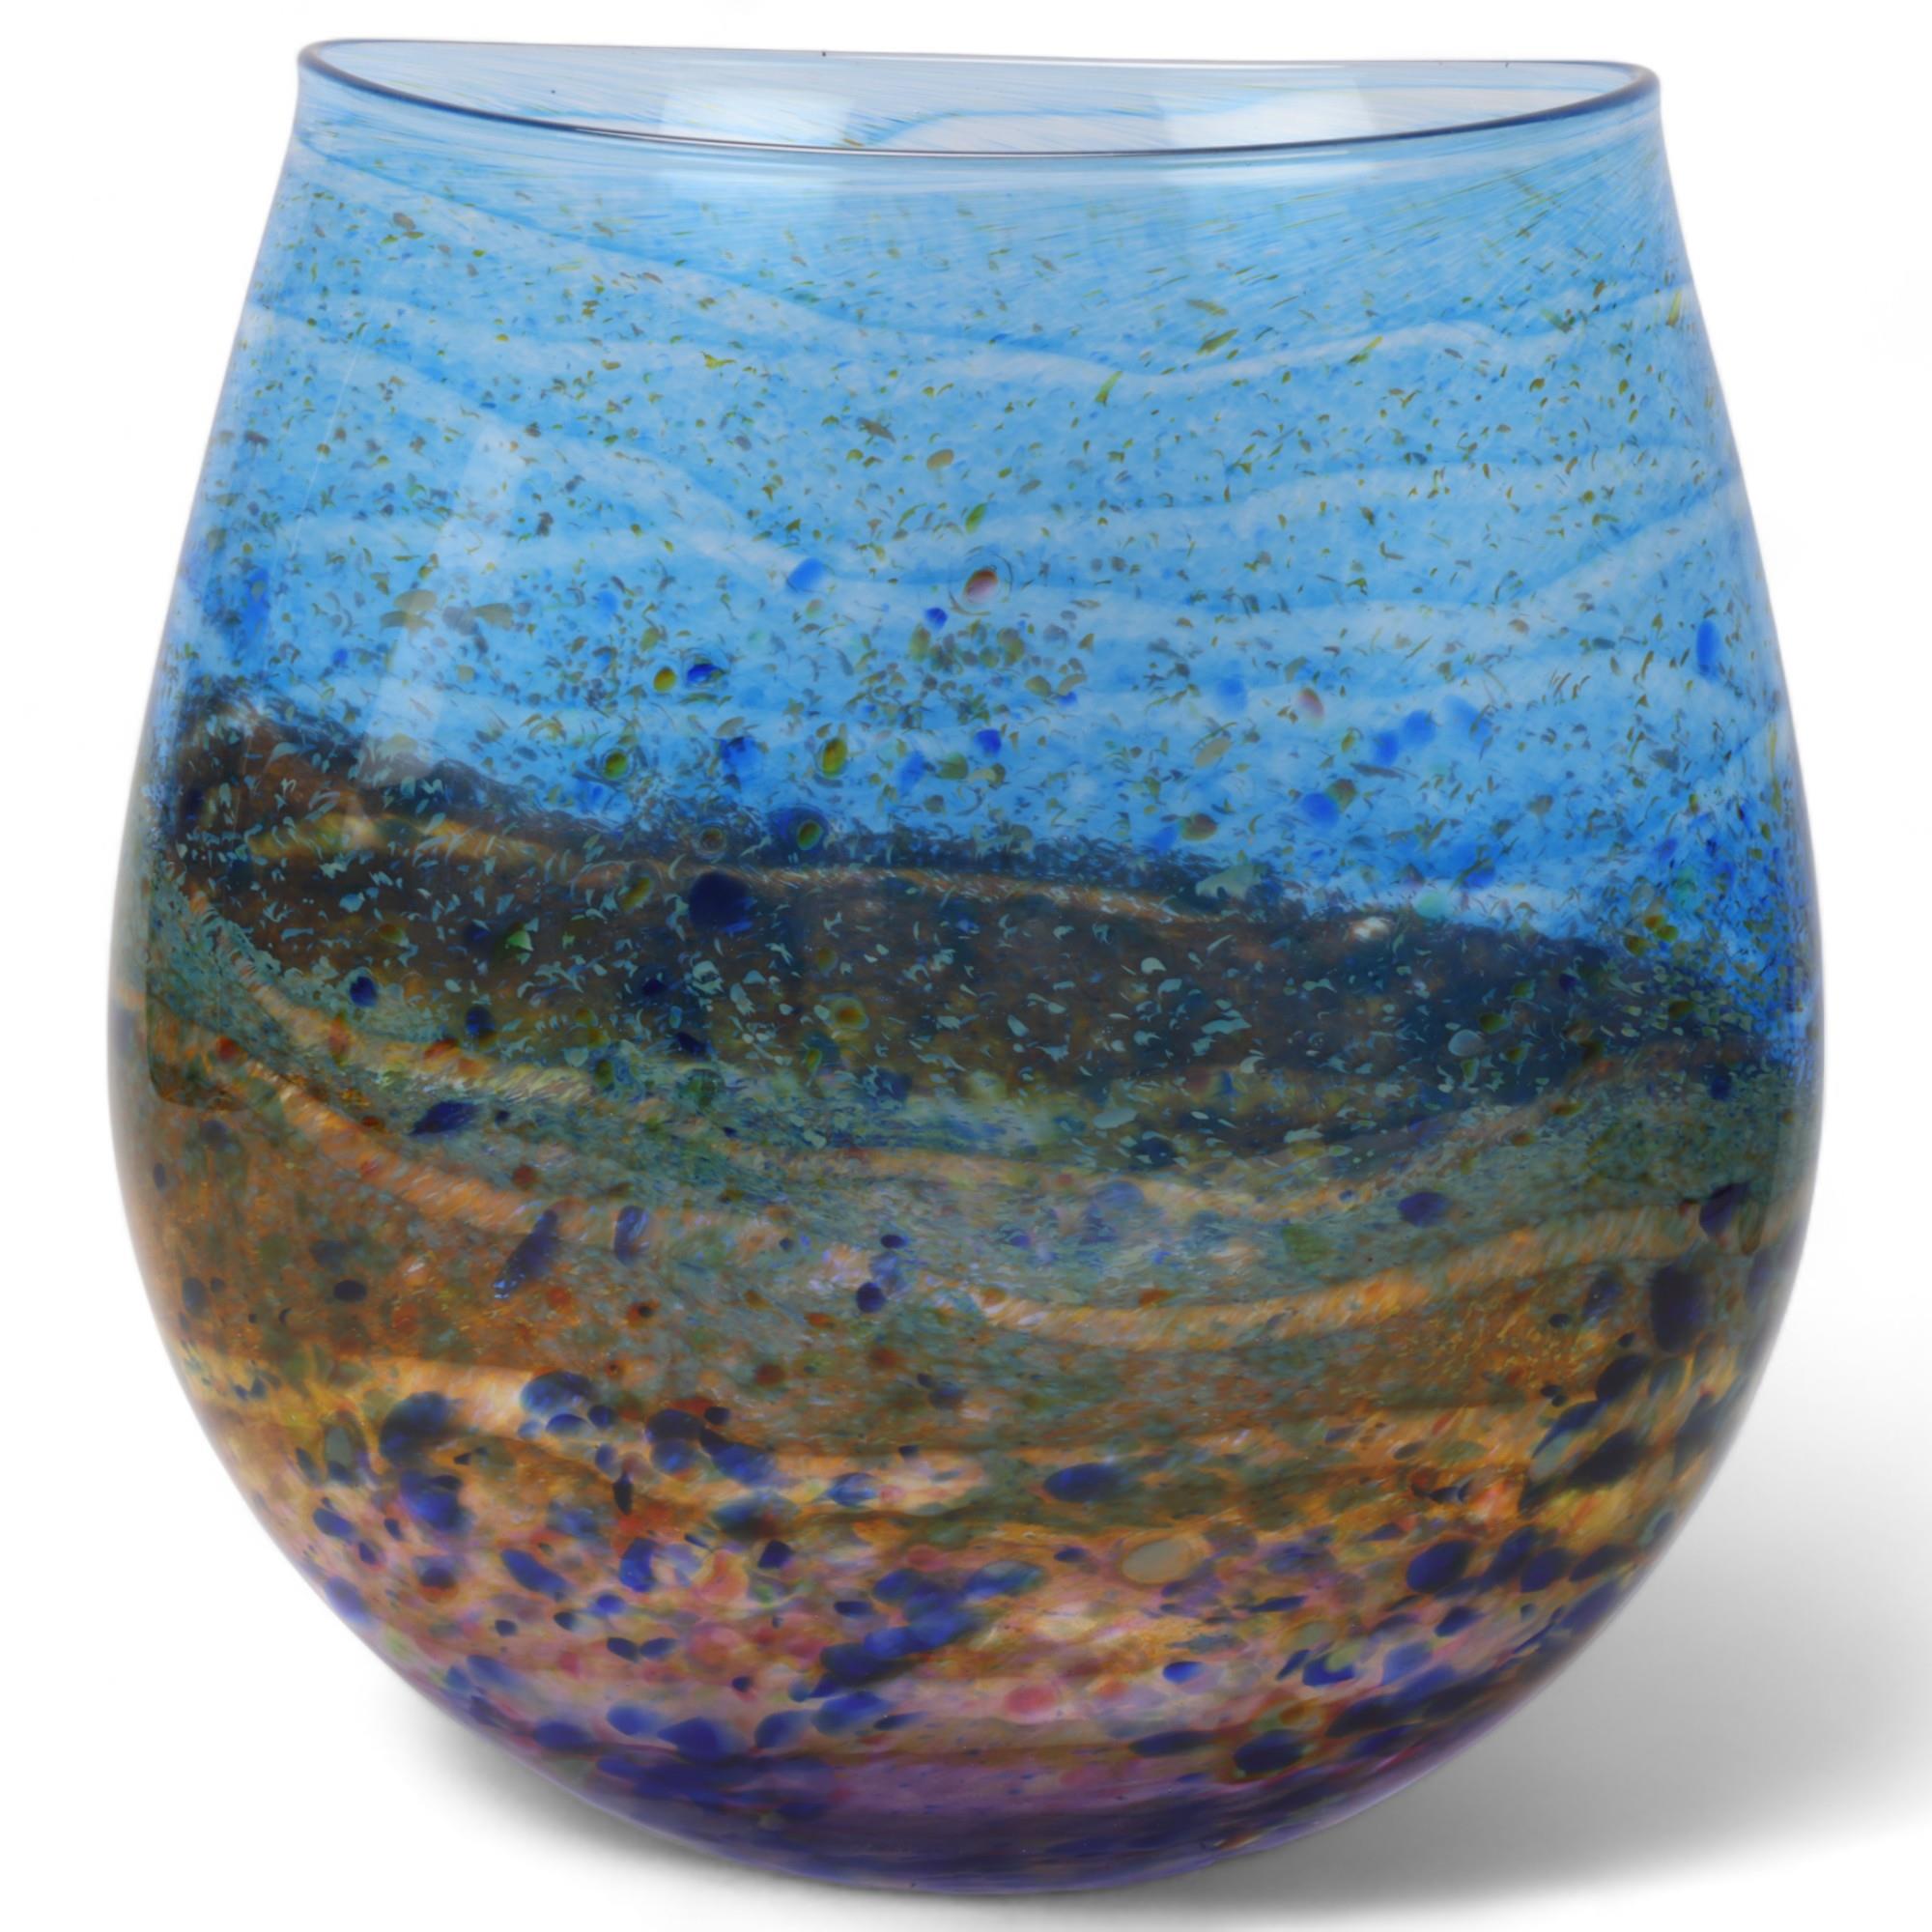 MARTIN ANDREWS, a large Haze Series studio glass vase, signed and dated 2003 to base, height 27cm